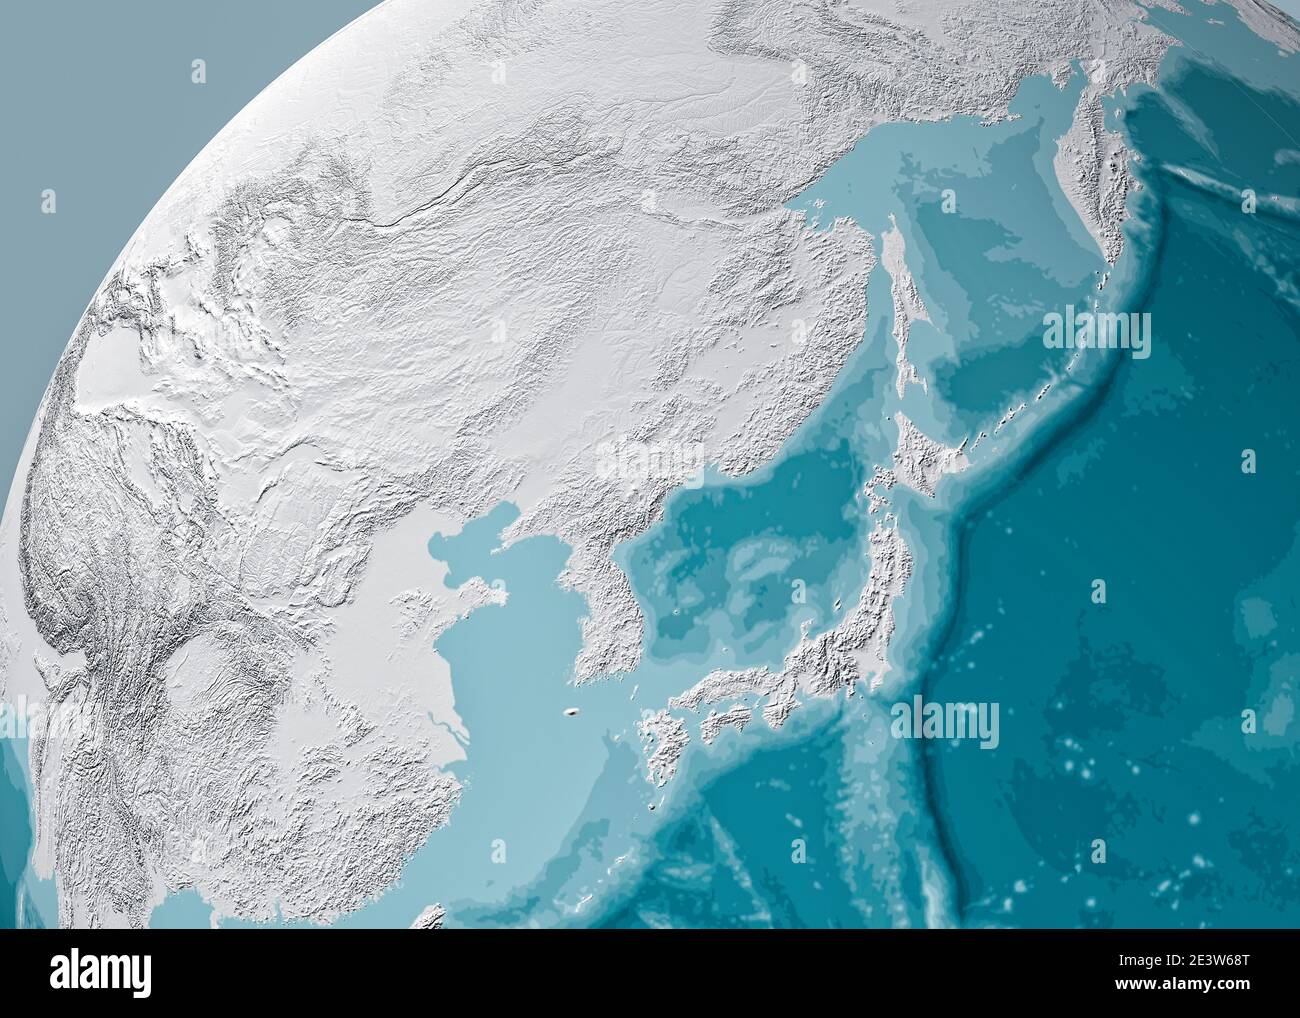 Globe map of Japan, North Korea and South Korea, physical map Asia, East Asia. Map with reliefs and mountains, Pacific Ocean. Bathymetry, underwater Stock Photo